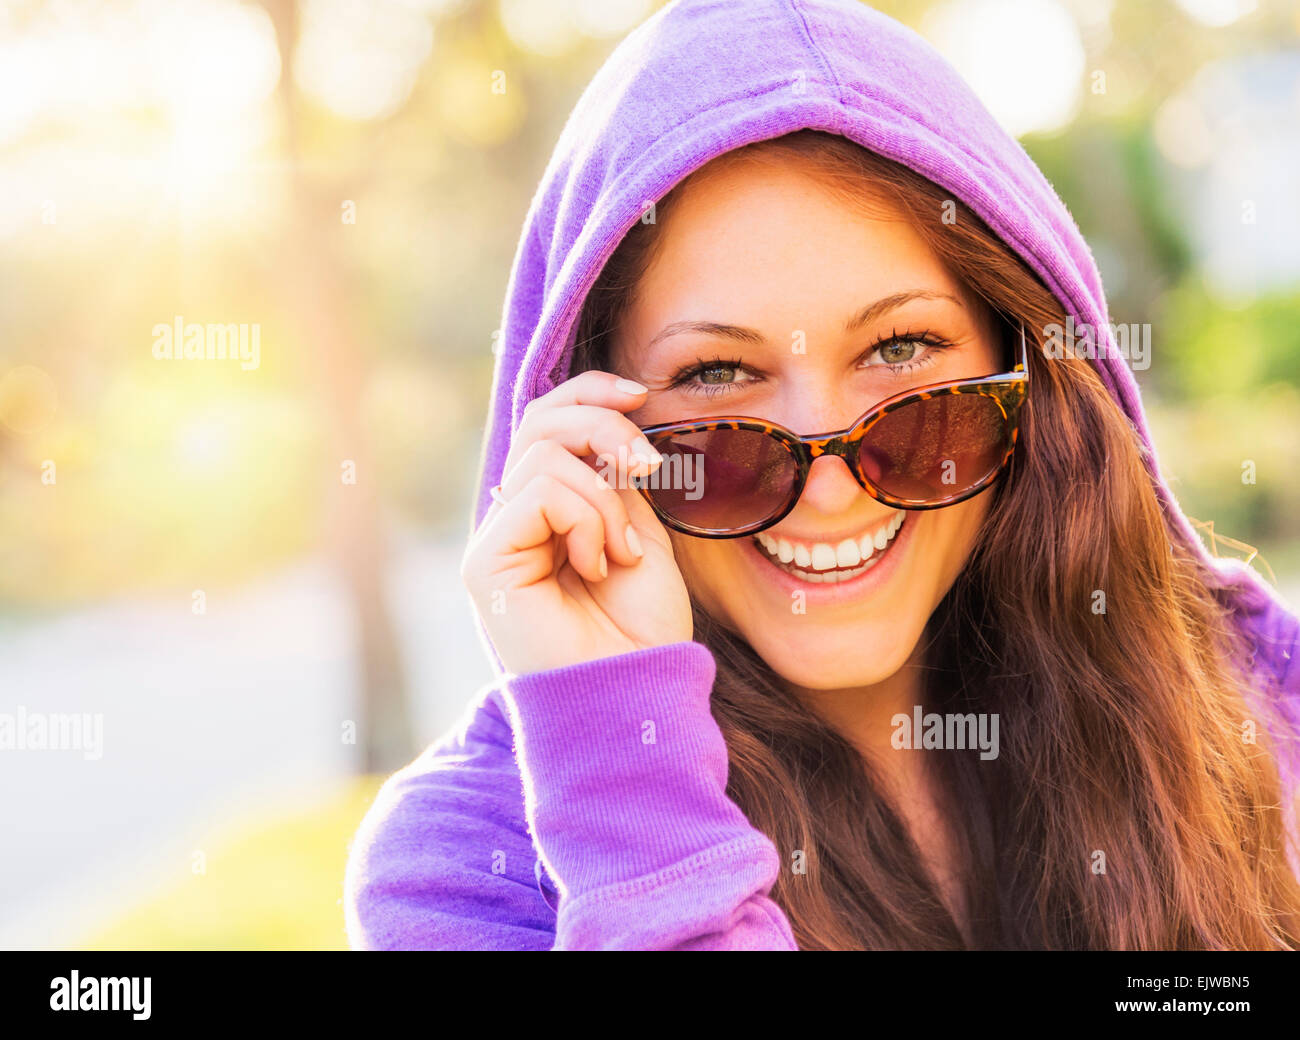 USA, Florida, Jupiter, Portrait of smiling woman in hoodie with sunglasses Stock Photo